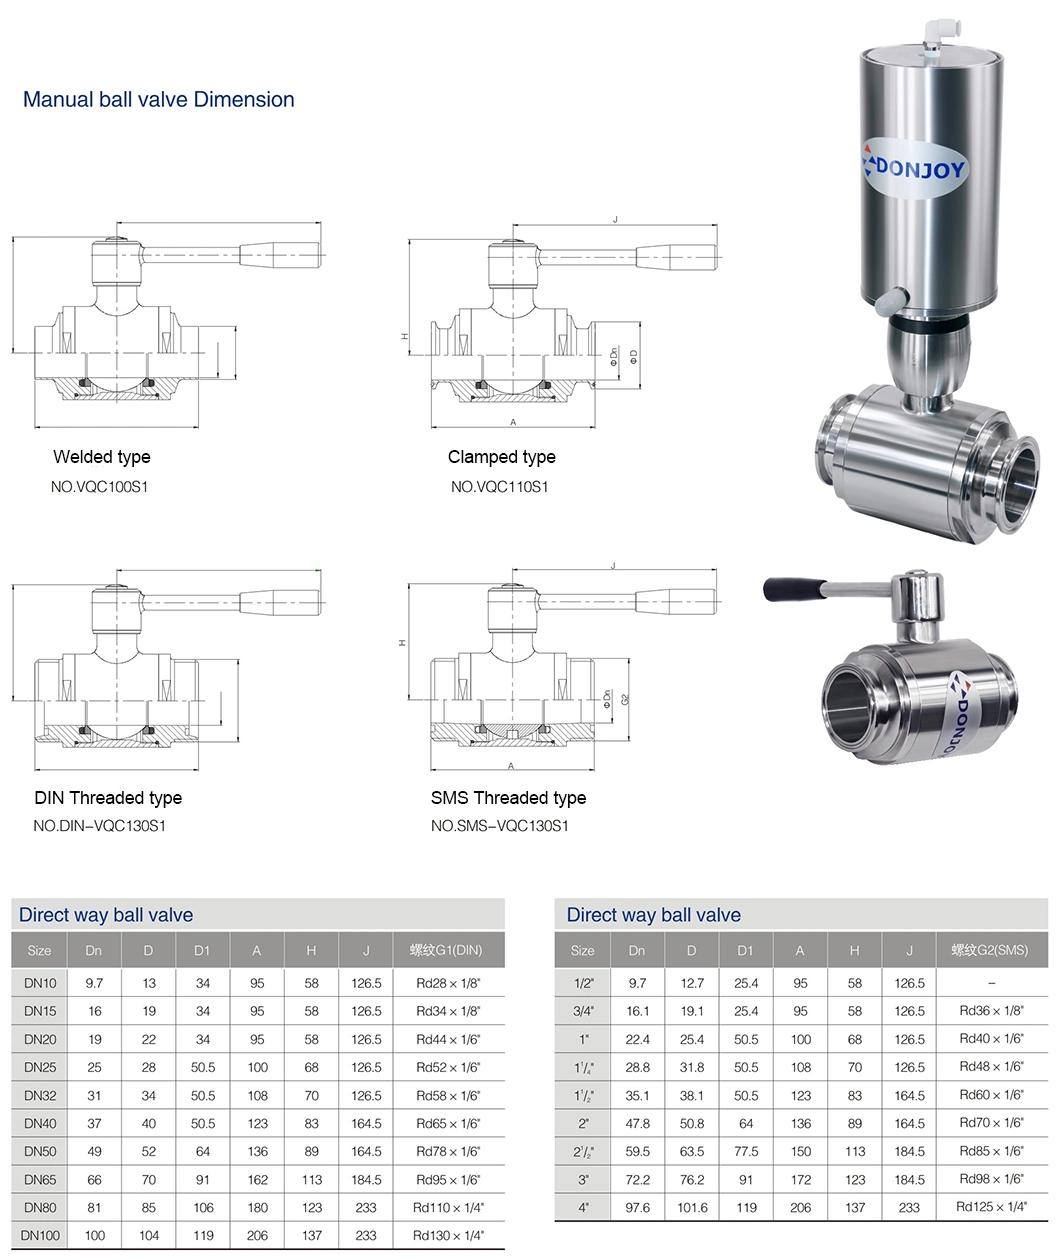 ISO 90001 Sanitary 3-Way Ball Valve with Actuator